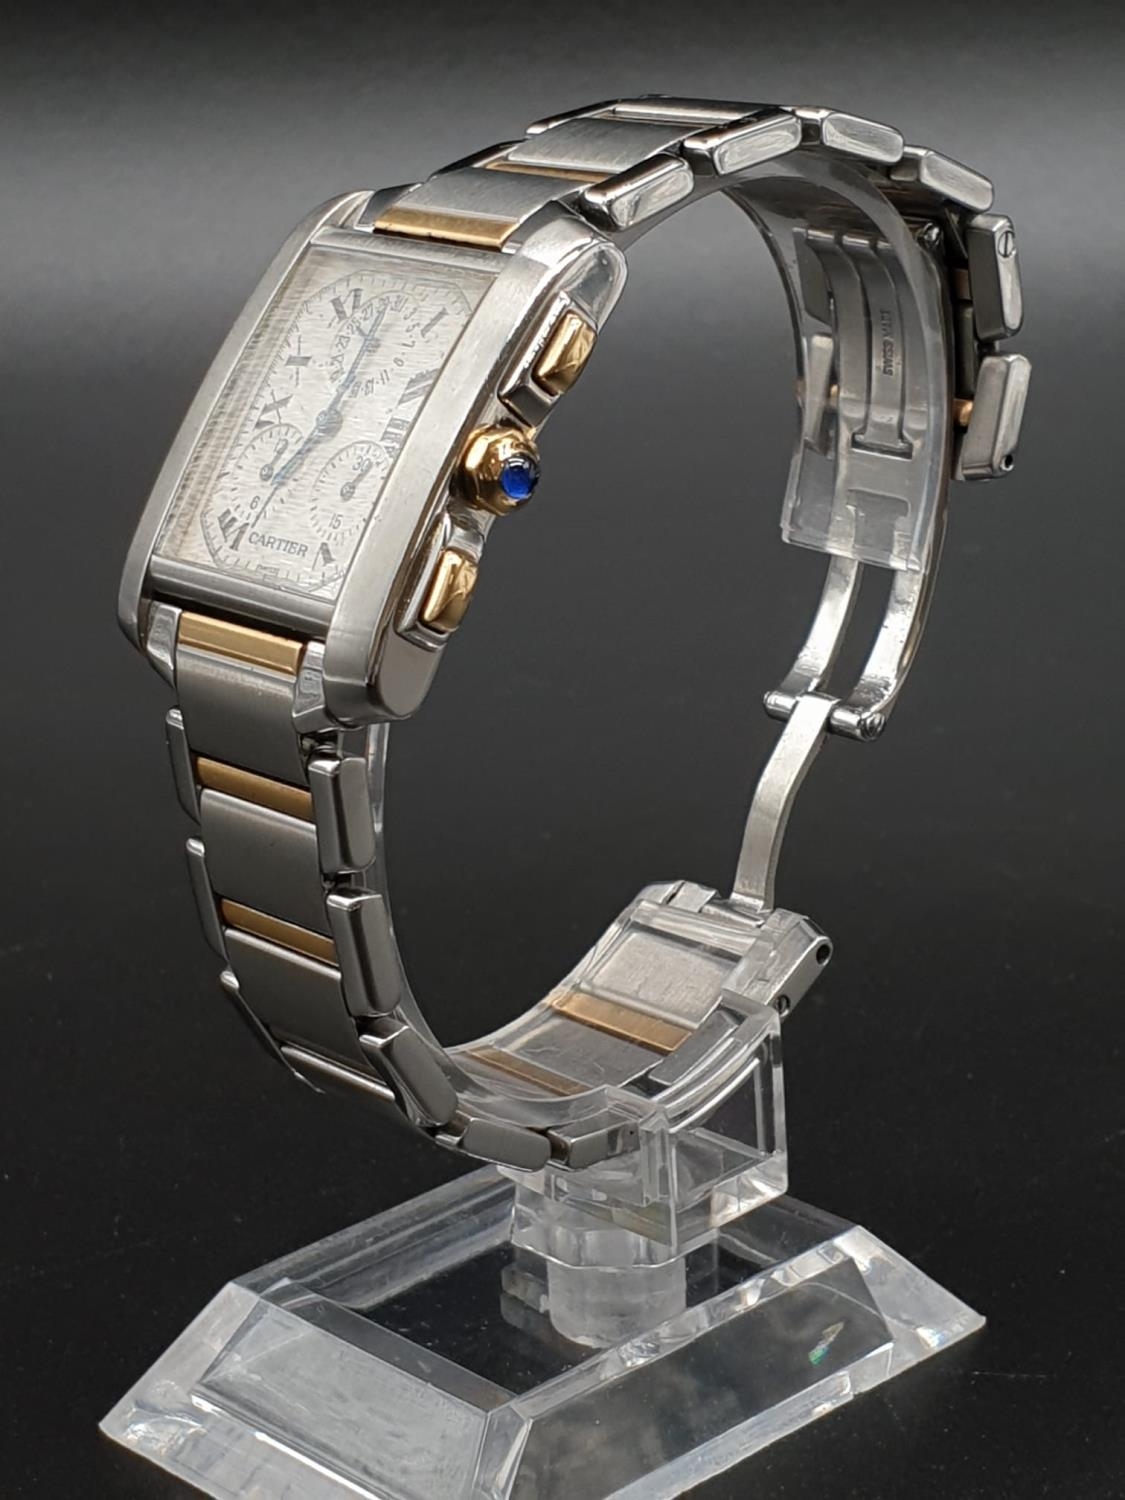 Cartier tank watch, square face Roman numerals and two-tone (bi-metal) strap - Image 2 of 13